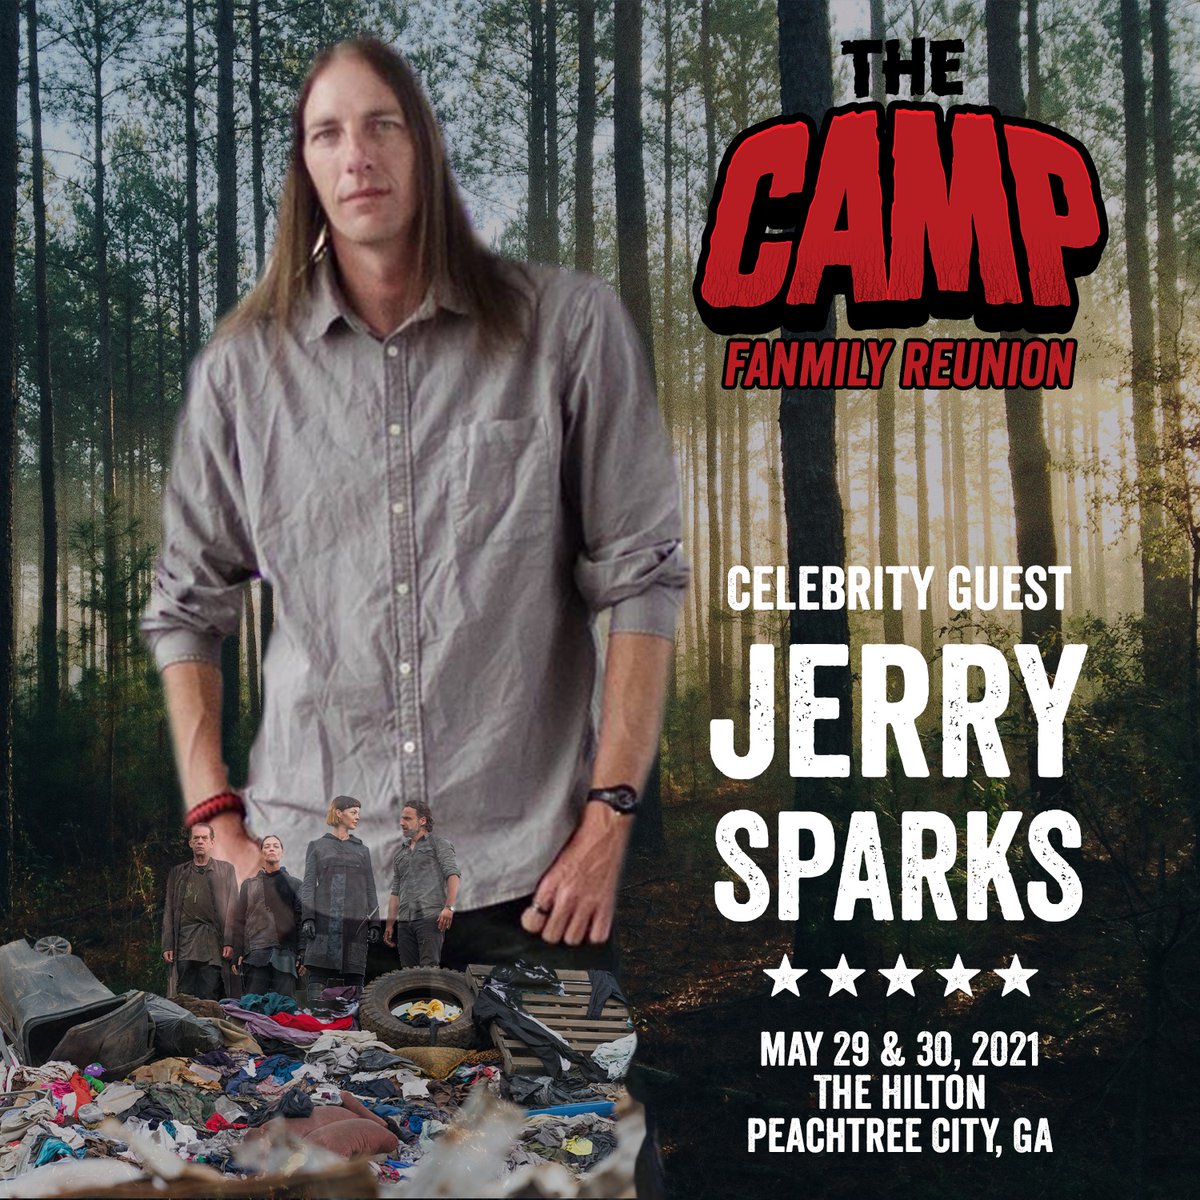 We would like to to welcome back to The Camp, Jerry Sparks (Scavenger on #TheWalkingDead)! We are so excited to have him join us in Peachtree City, GA on May 29 & 30, 2021! . . ℹ️/🎟 For more information visit: thecampevents.com/may 💻 #TheCamp #TWD #WalkingDead #TWDFamily